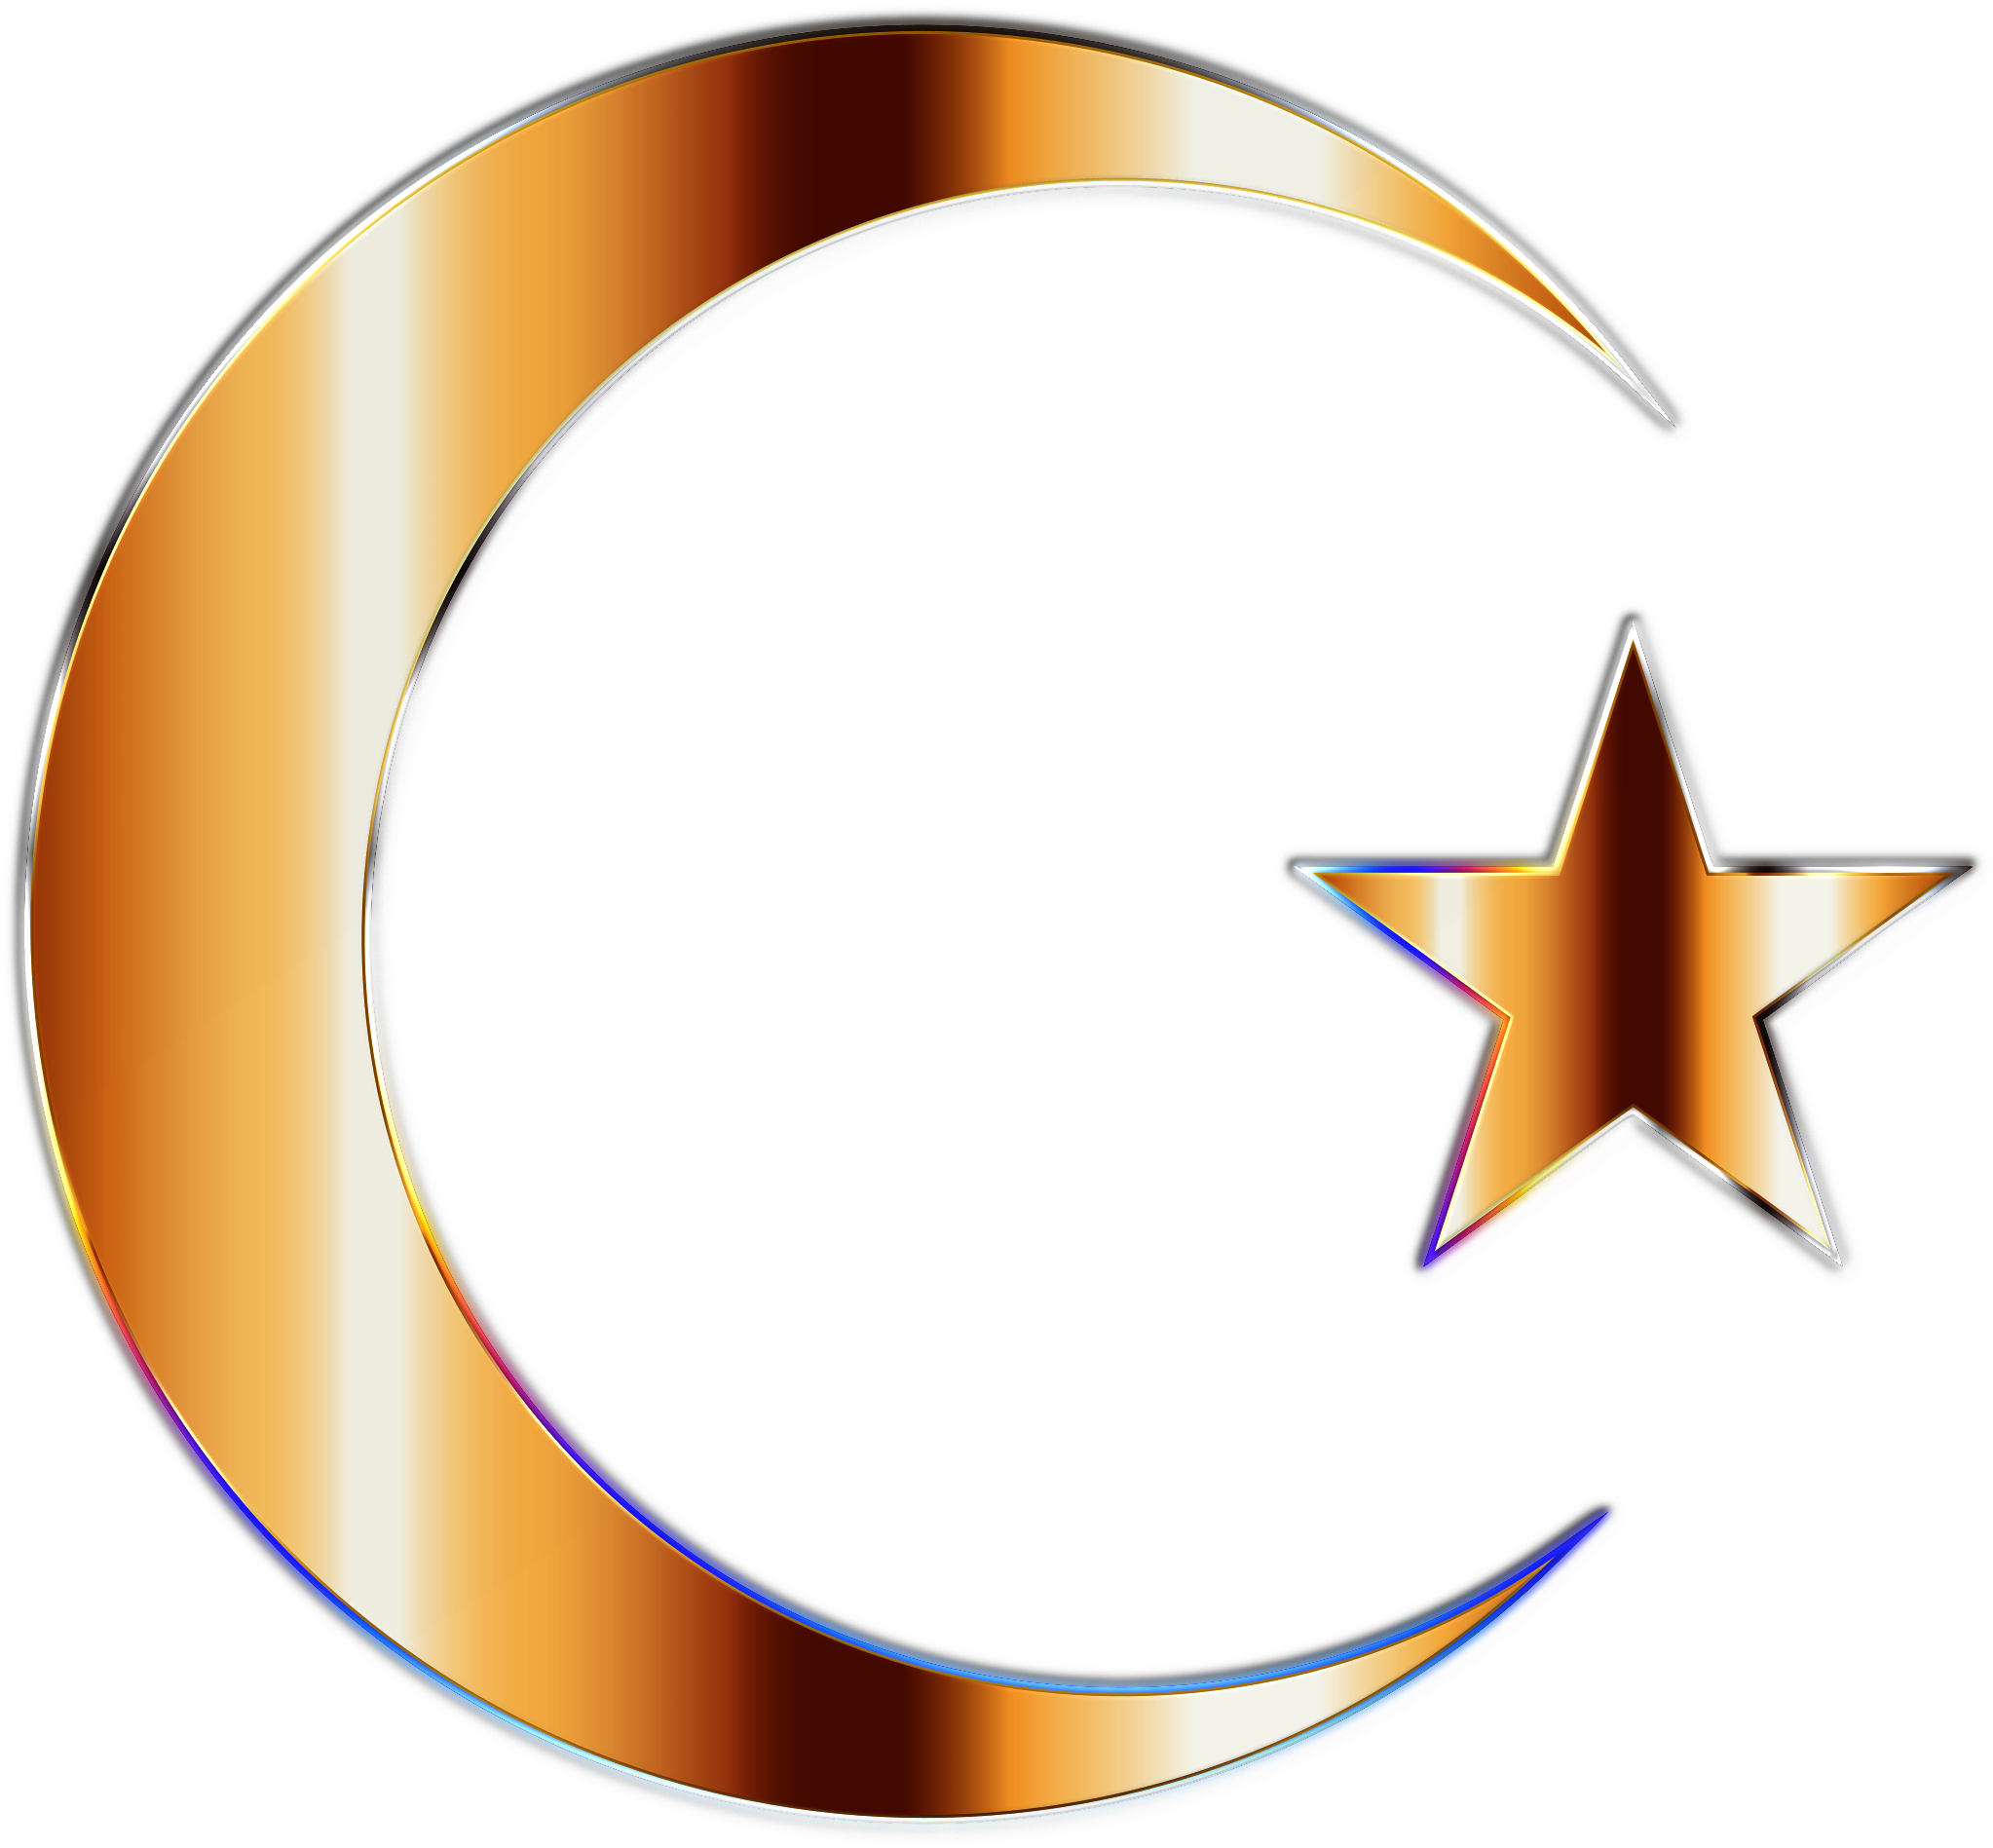 Download Golden Crescent Moon And Star Clipart Transparent Stock Gold Crescent And Star Png Image With No Background Pngkey Com